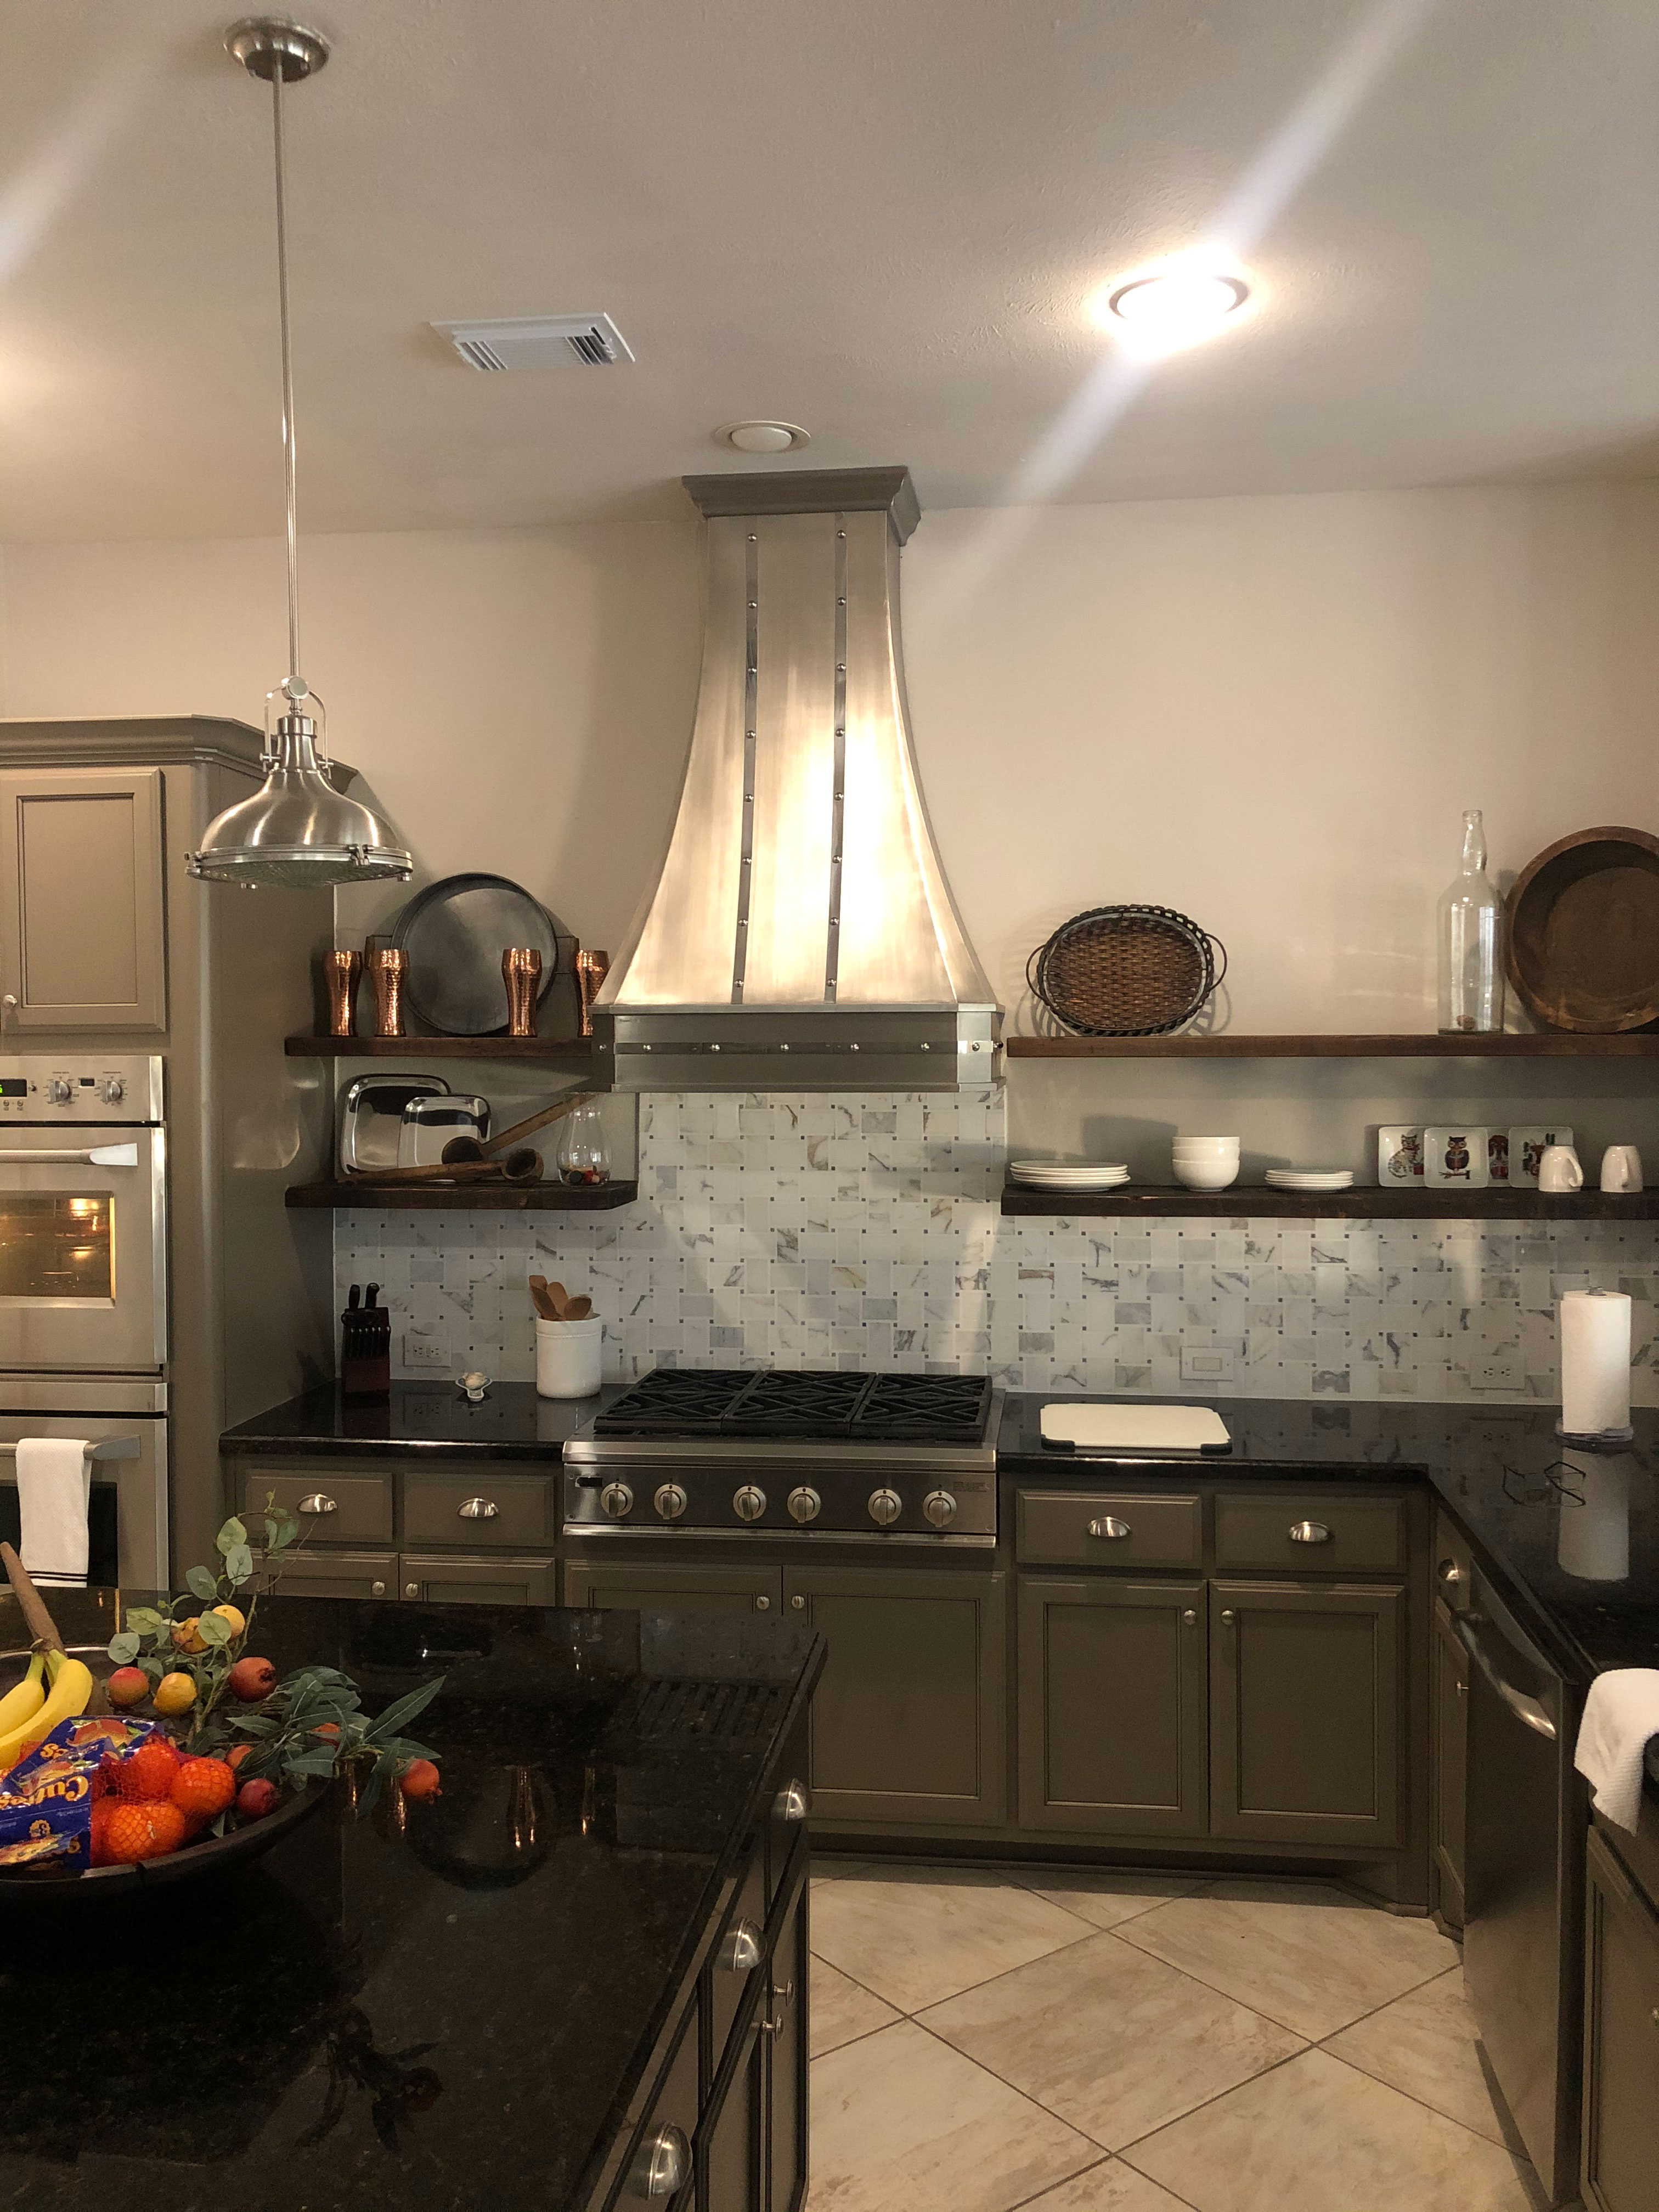 Stainless steel range hood in a kitchen with gray cabinets. World CopperSmith